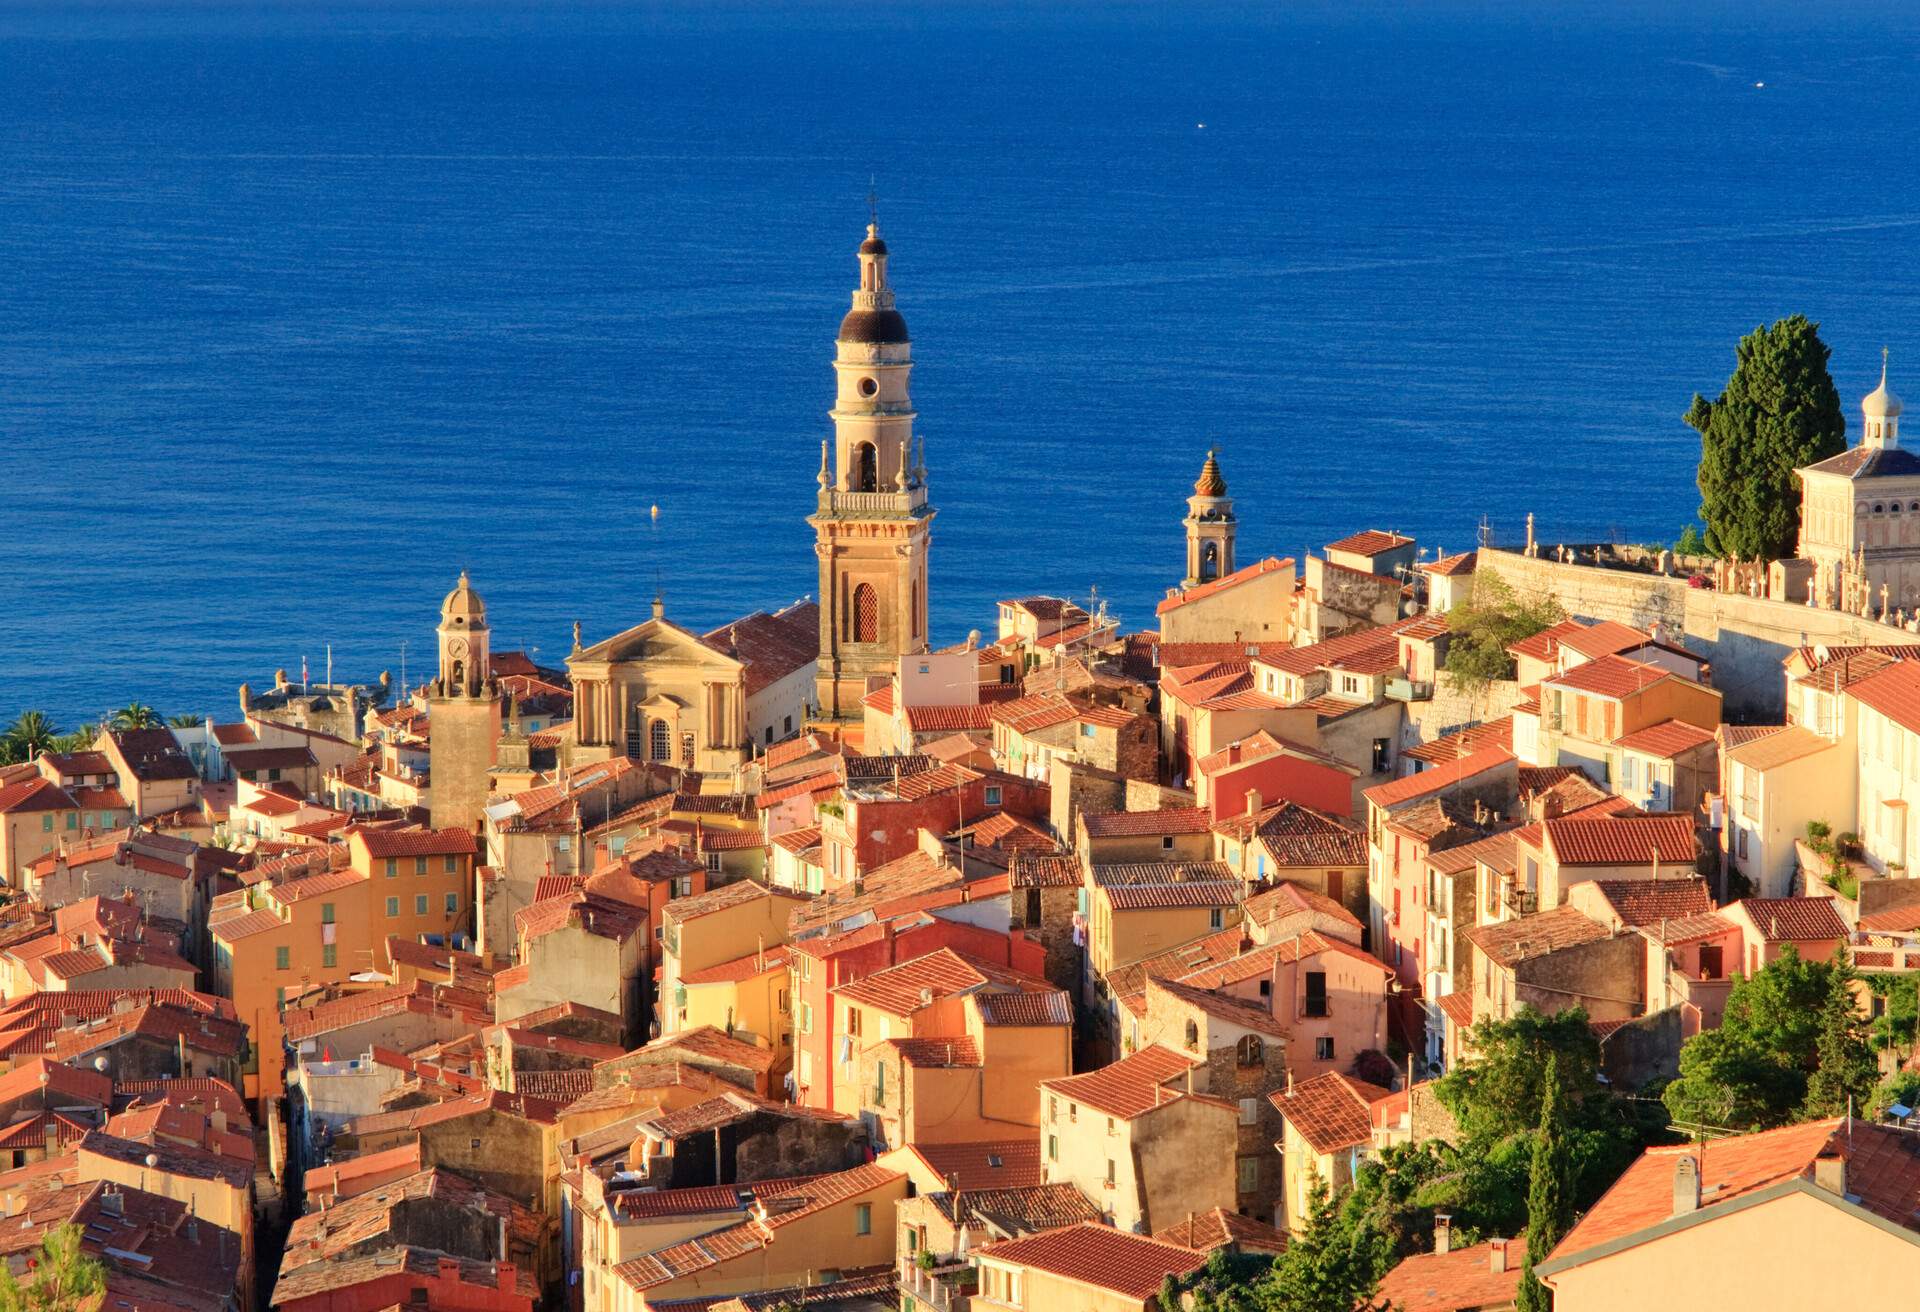 High angle of small town of Menton, overlooking the mediterranean sea. Cote d'Azur, French Riviera, France.